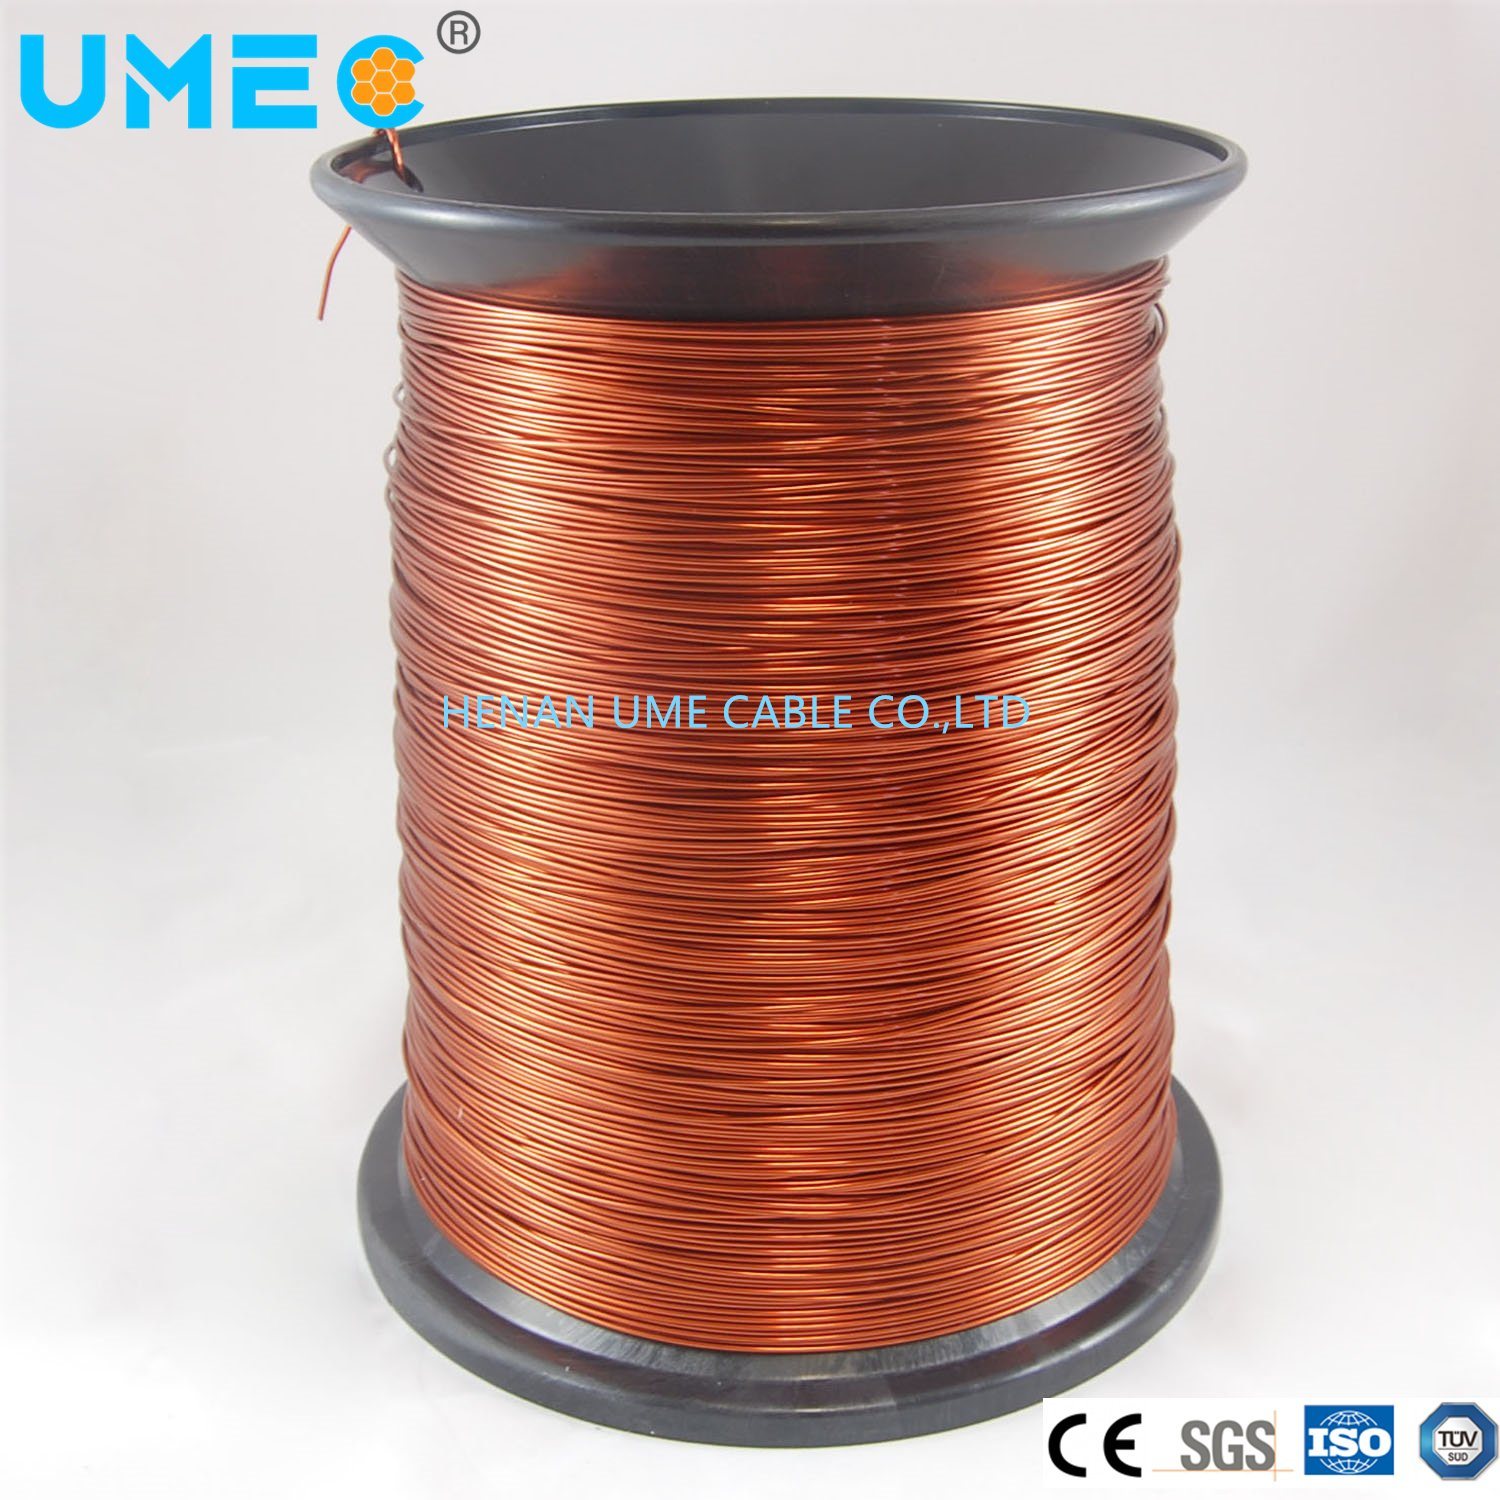 High-Quality Electroplated Enameled Wire Enamel Copper Clad Aluminium Wire 0.13mm 8-10% Enameled Al Cu Cable Wire